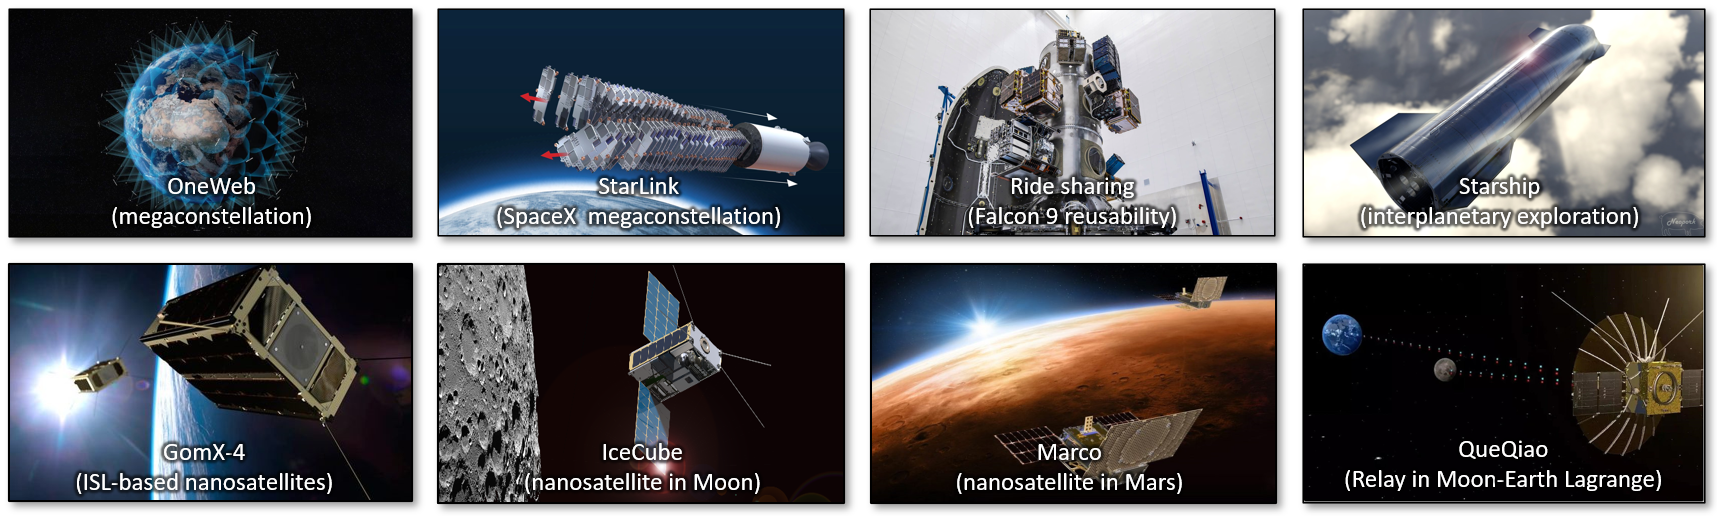 Missions Image